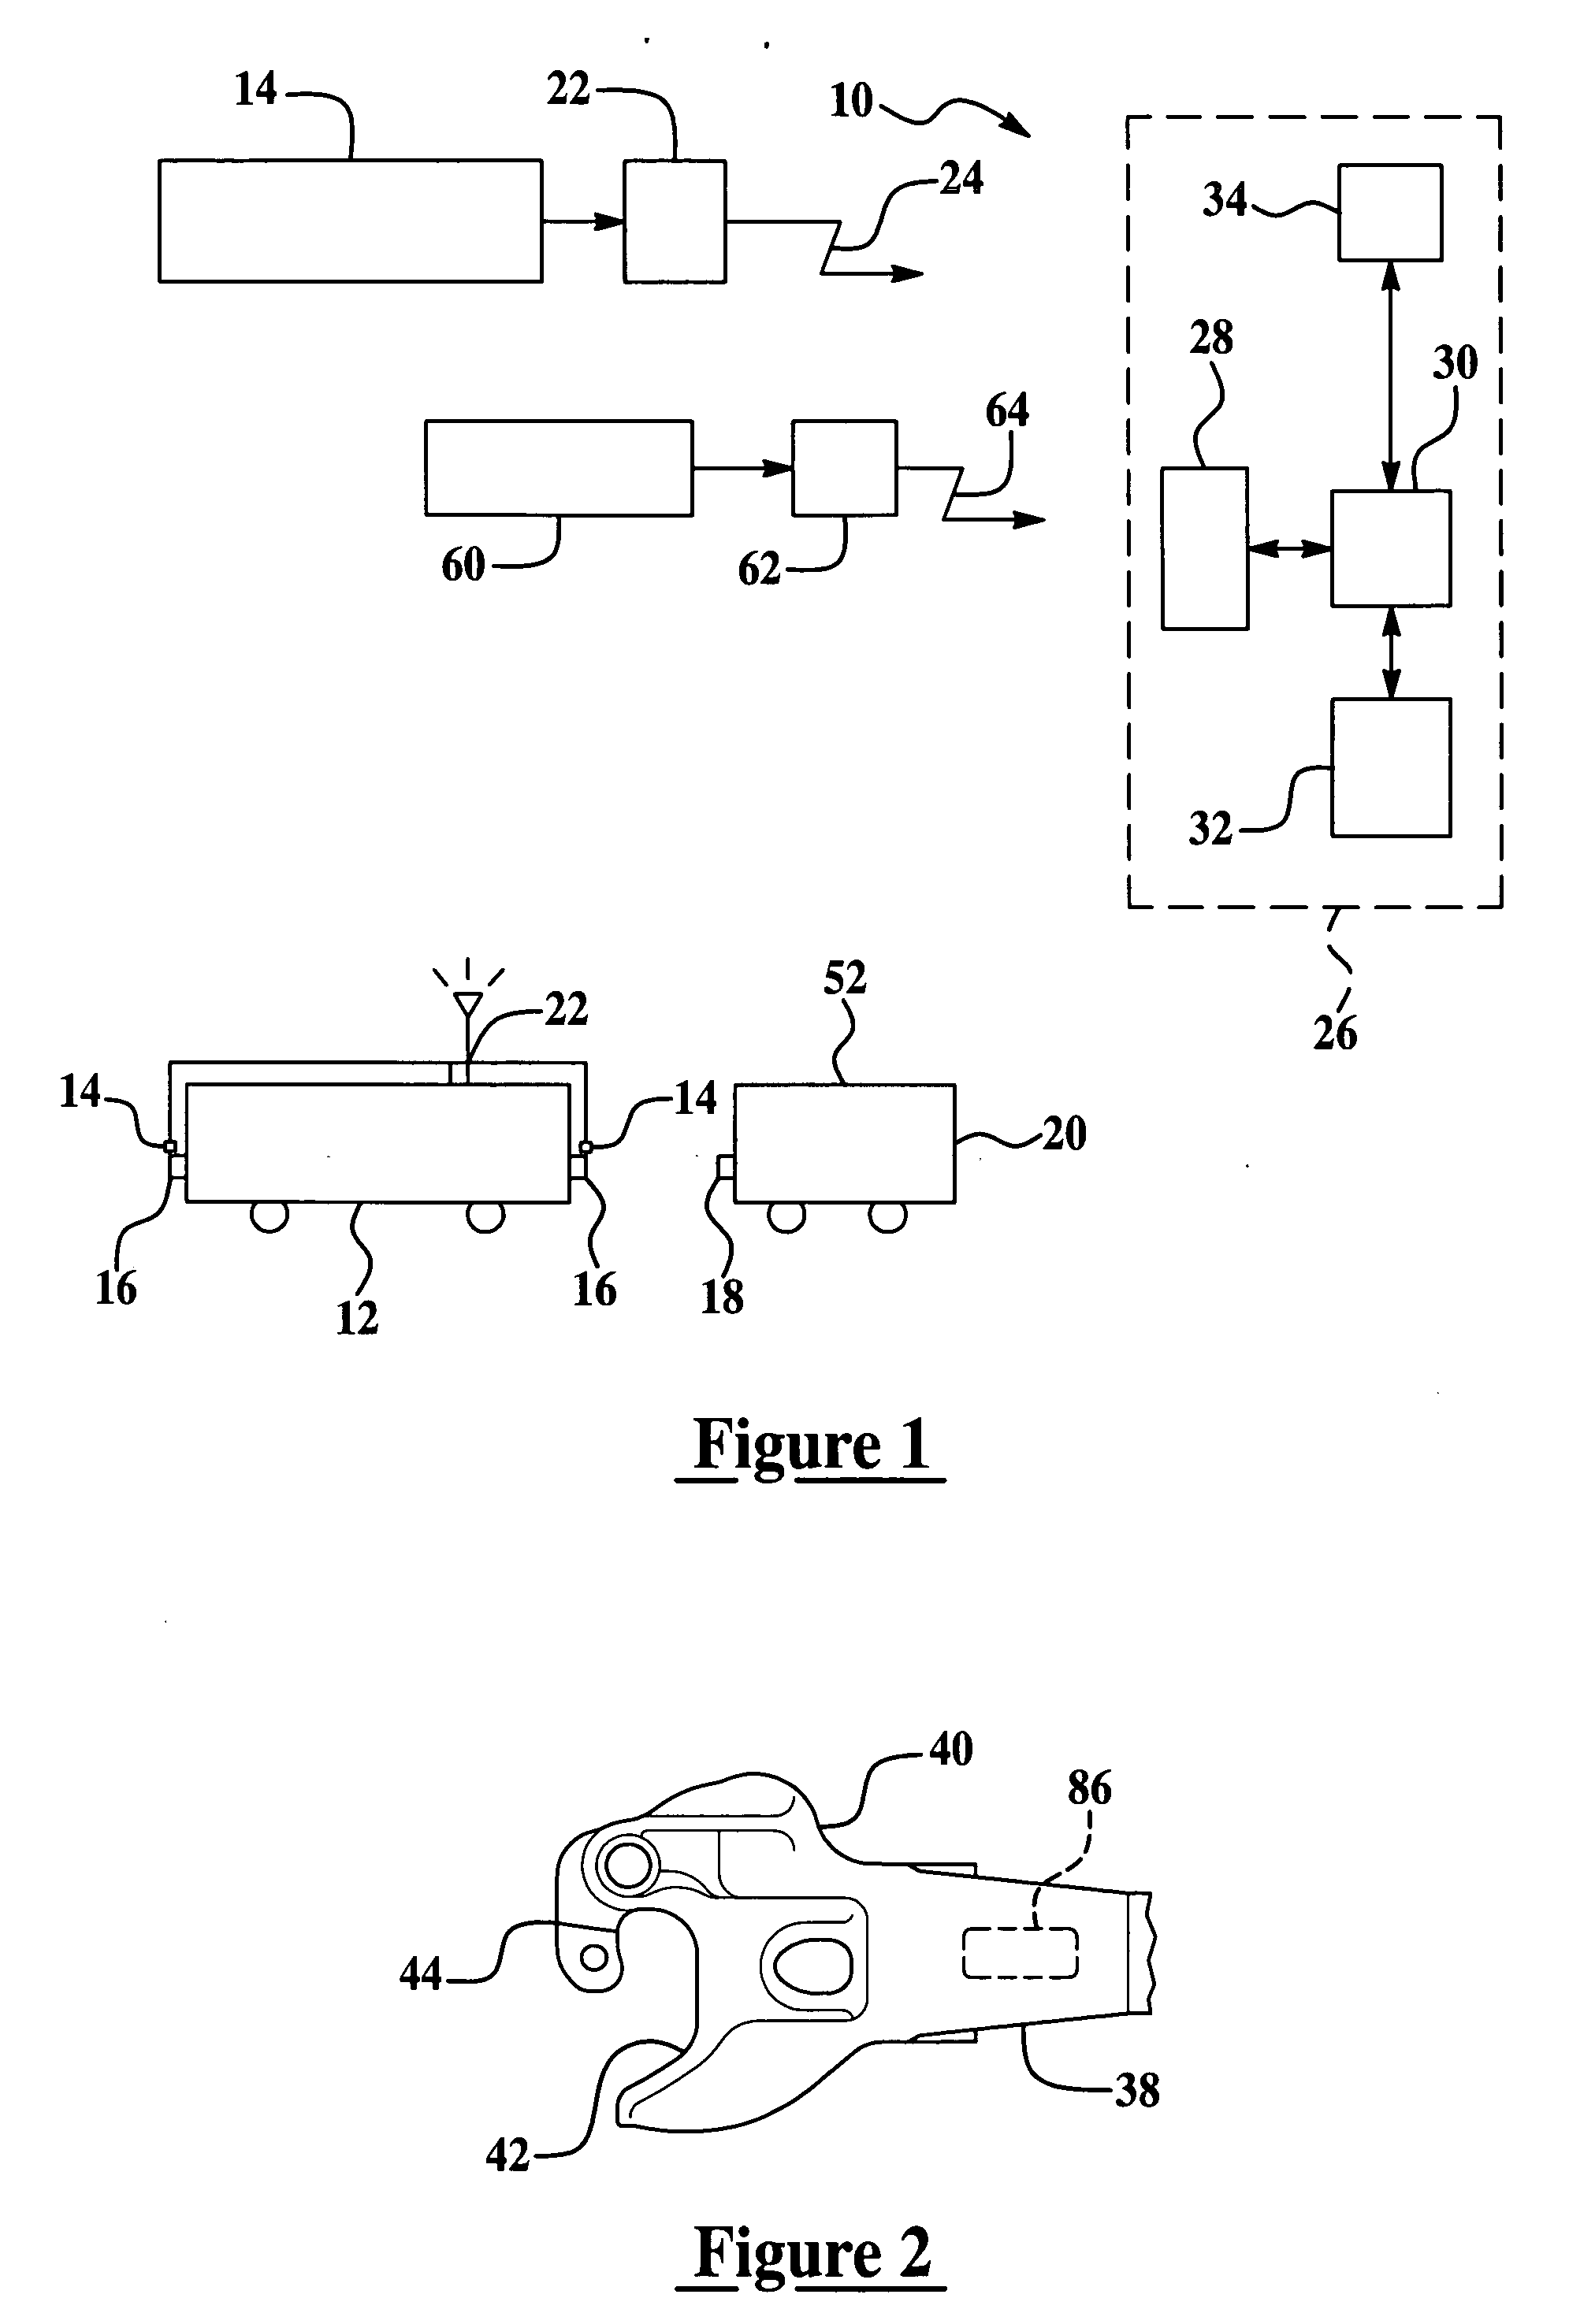 System and method for determining whether a locomotive or rail engine is coupled to a rail car or other engine